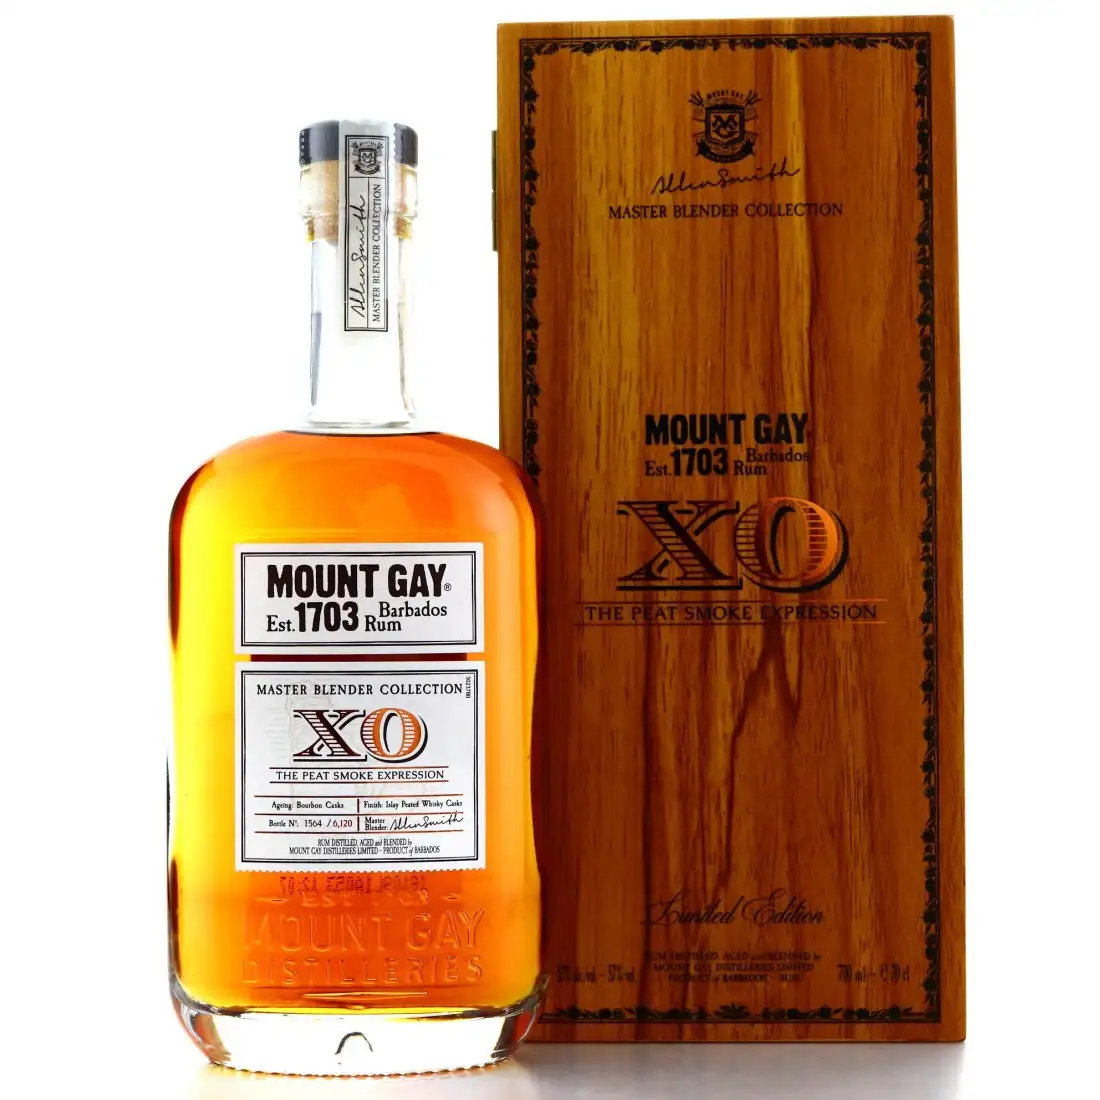 Image of the front of the bottle of the rum Master Blender Collection - XO The Peat Smoke Expression